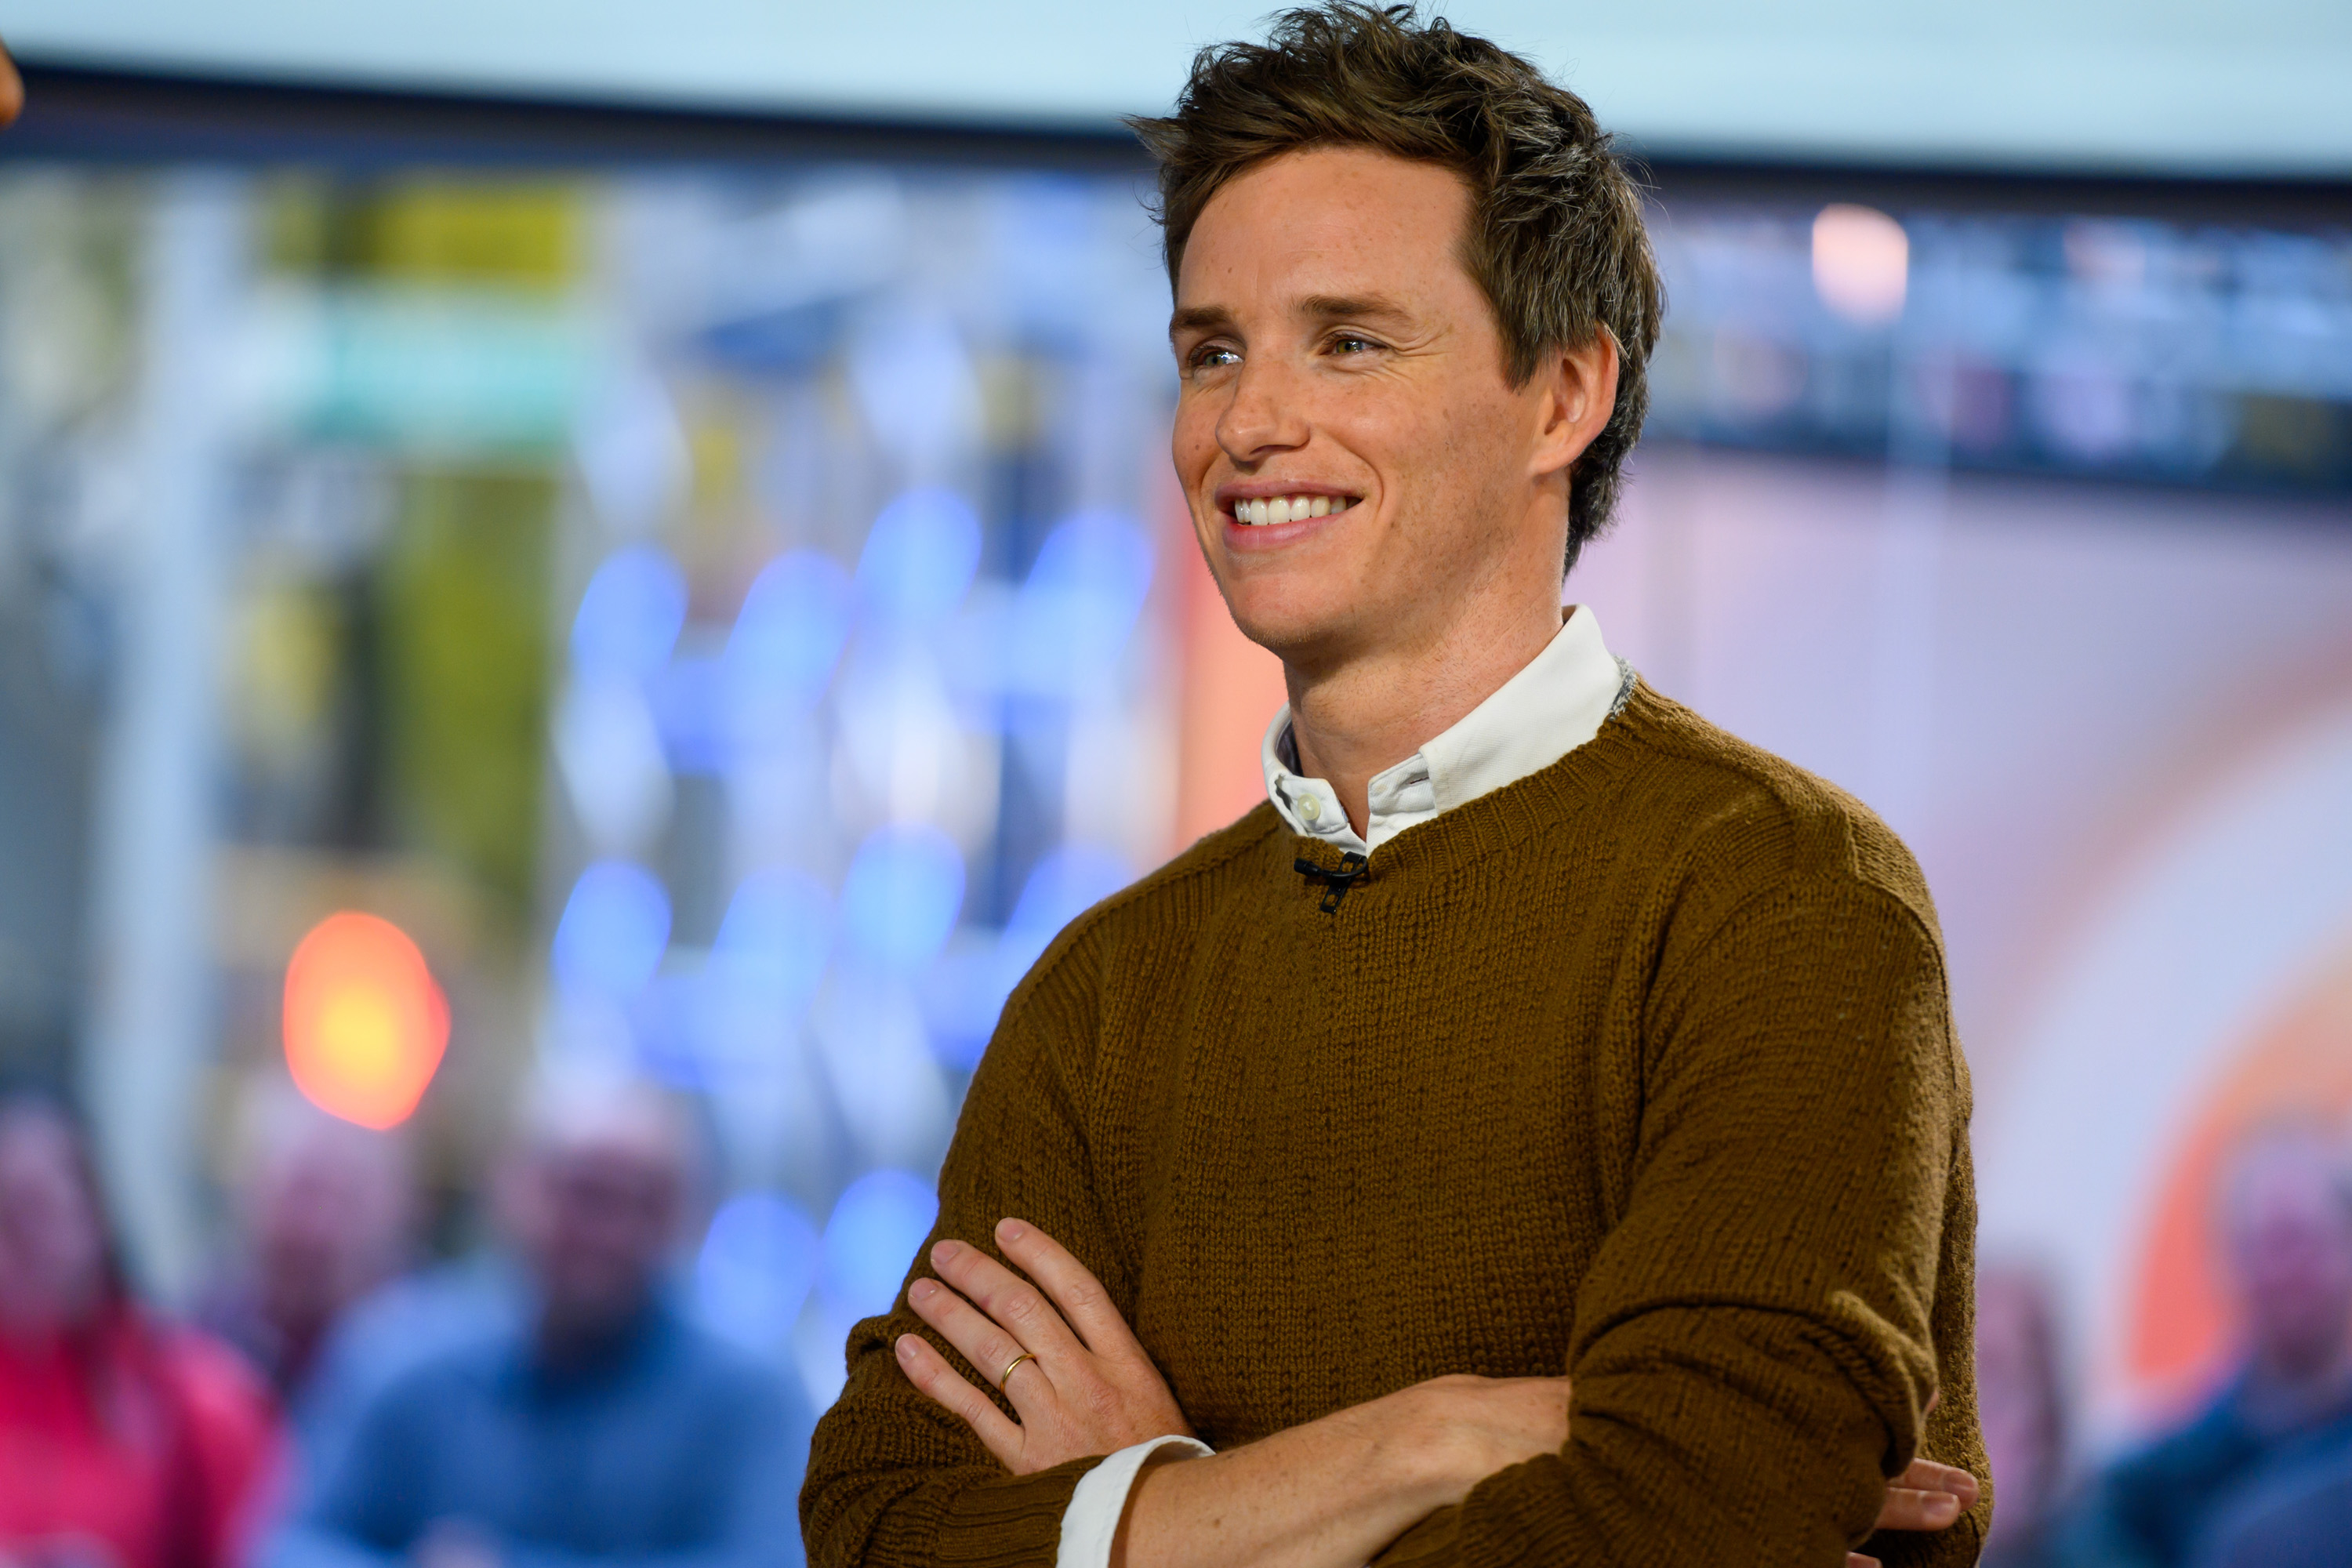 Eddie Redmayne smiling in a studio, wearing a sweater over a collared shirt, arms crossed